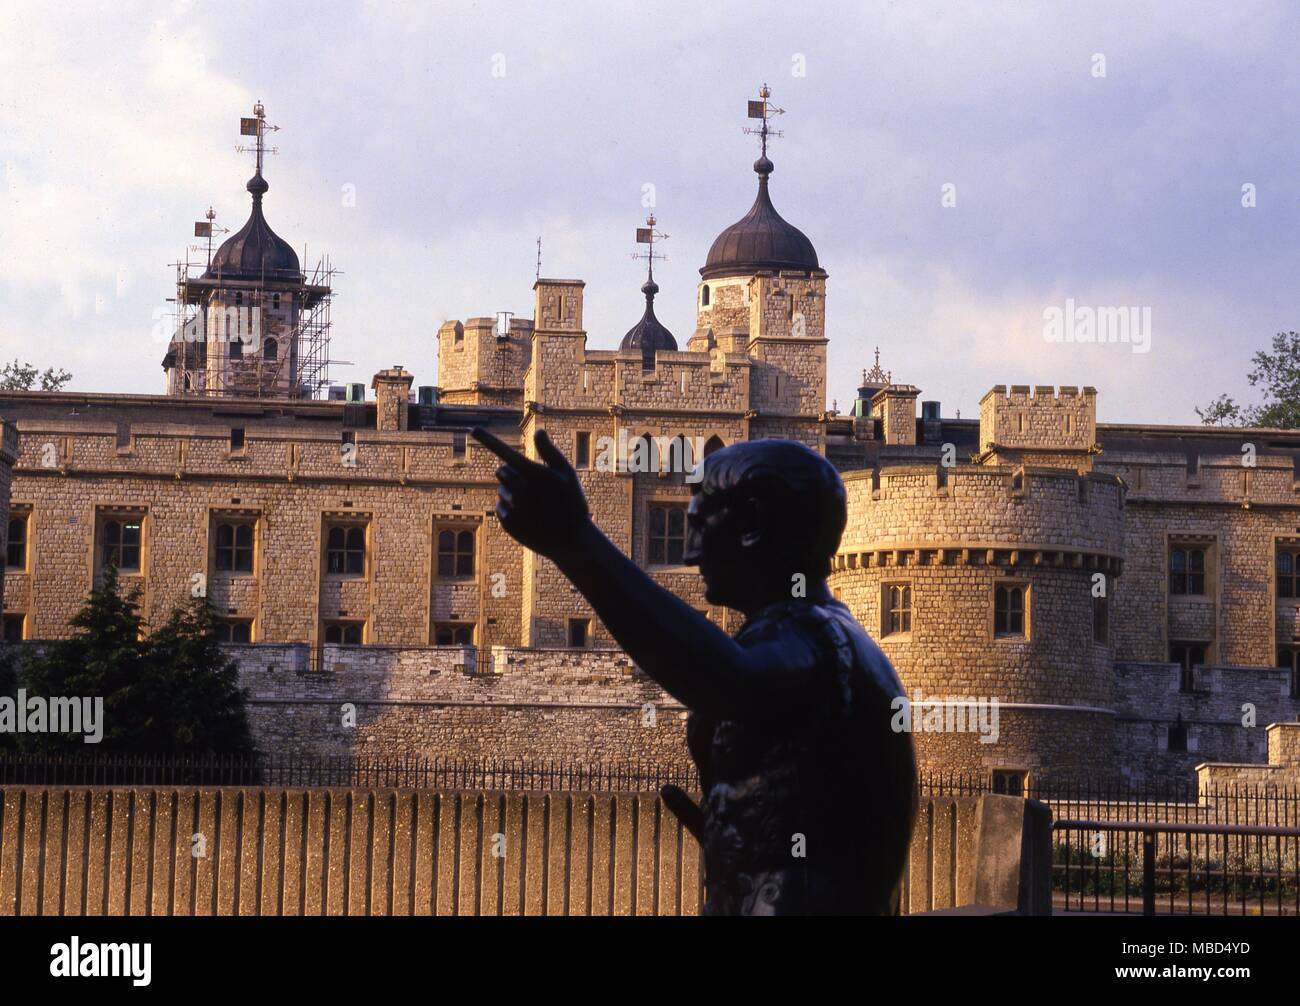 The Tower of London is said to be the most haunted castle in England. A view of the tower, with the bronze statue of the Roman Emperor, Hadrian, in the foreground Stock Photo